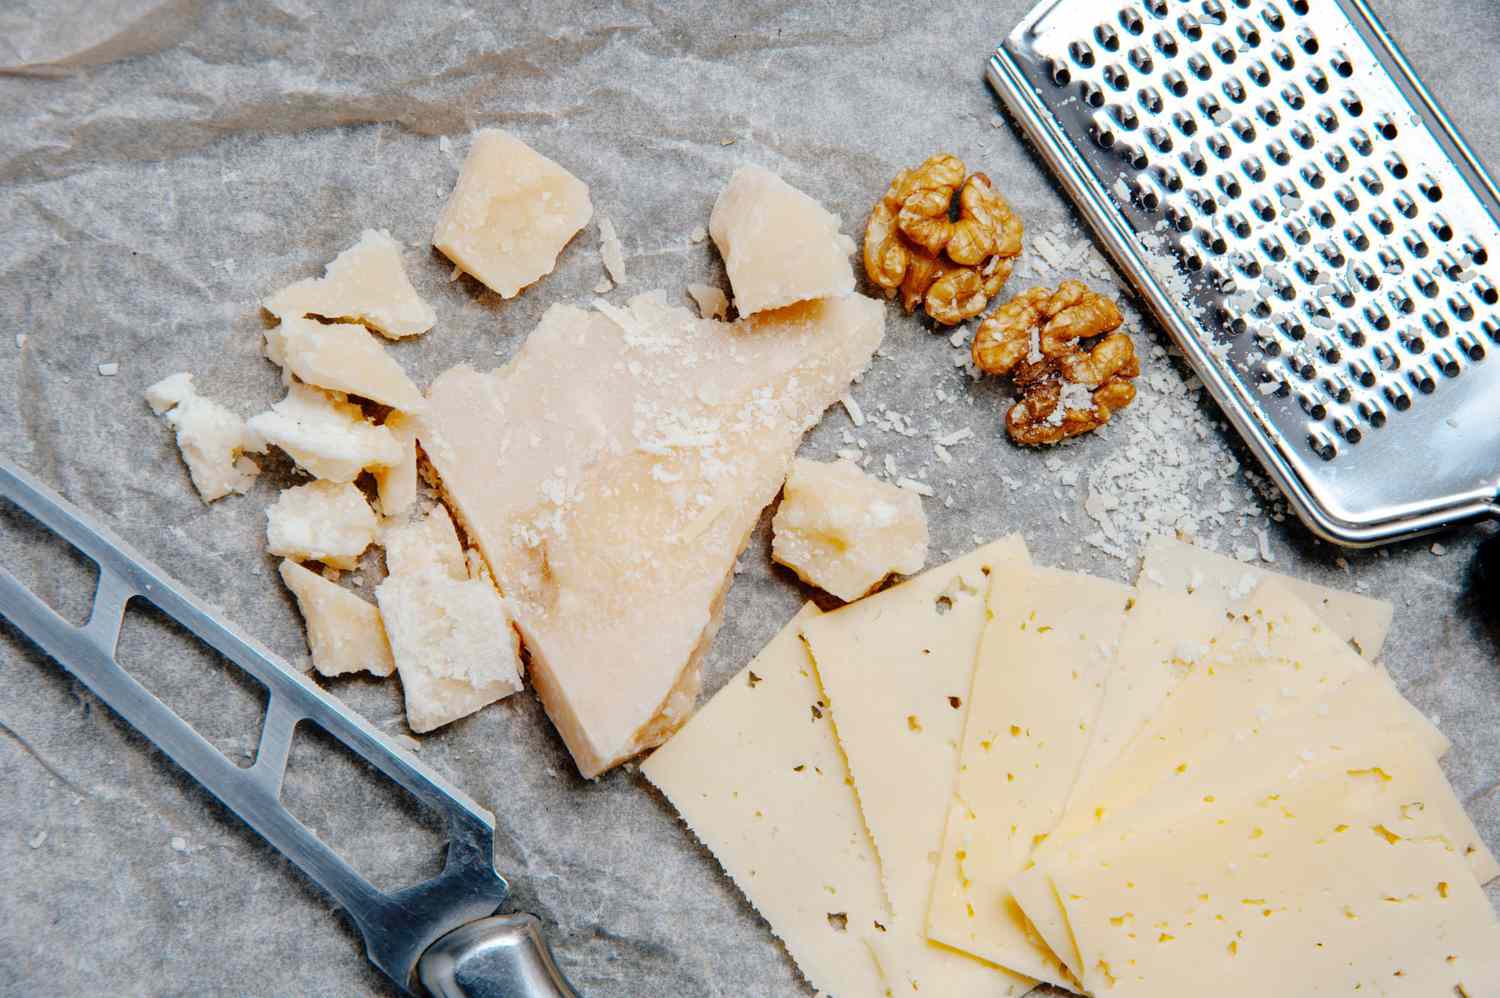 parmesan-cheese-buying-guide: Parmesan and grater